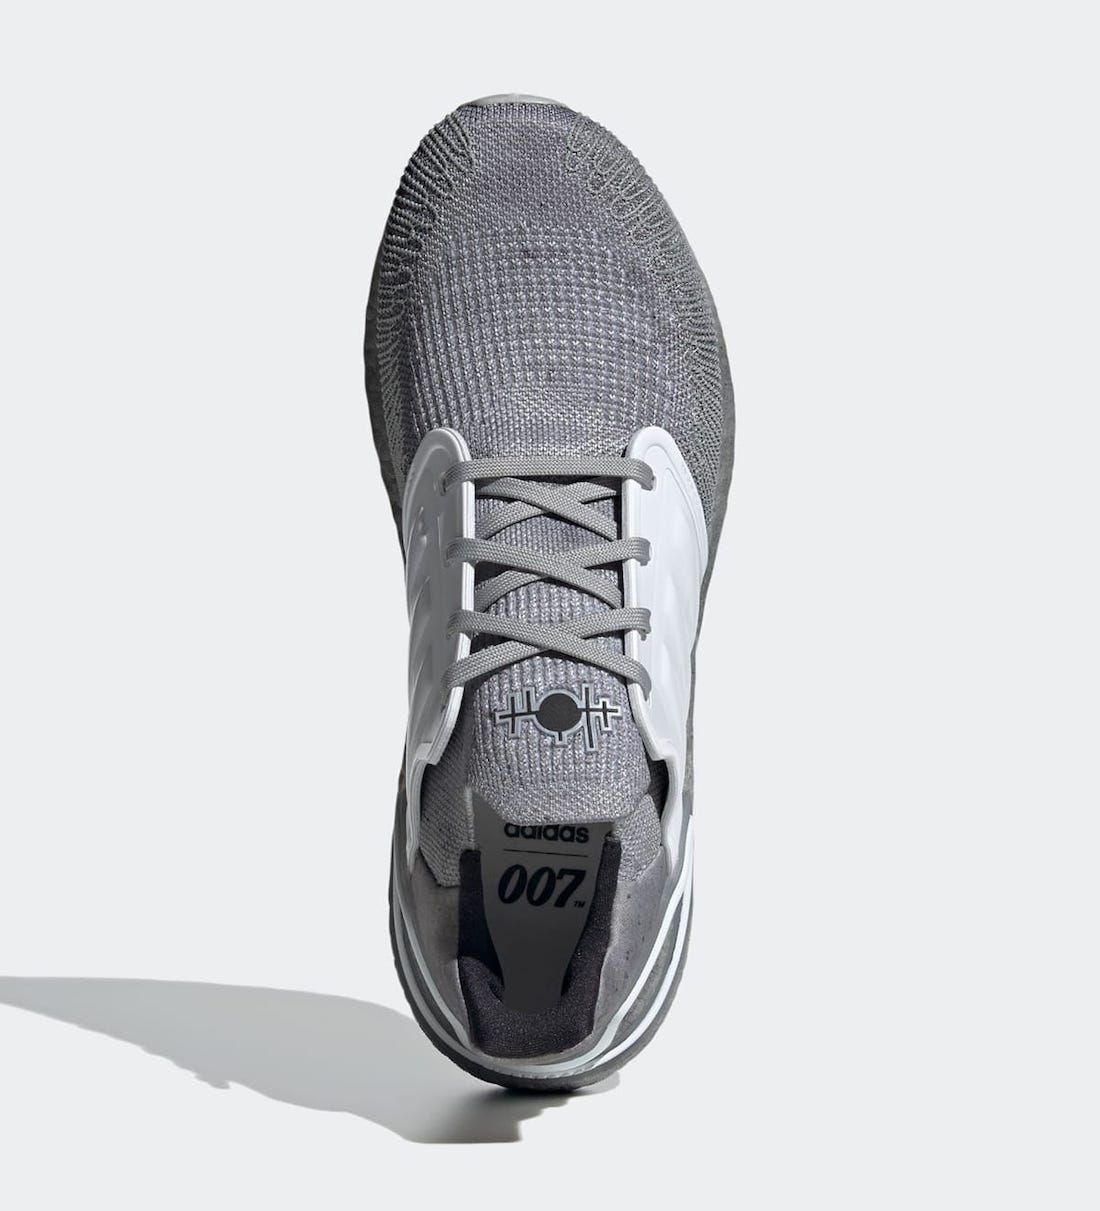 James Bond 007 adidas Ultra Boost 2020 FY0647 Release Date